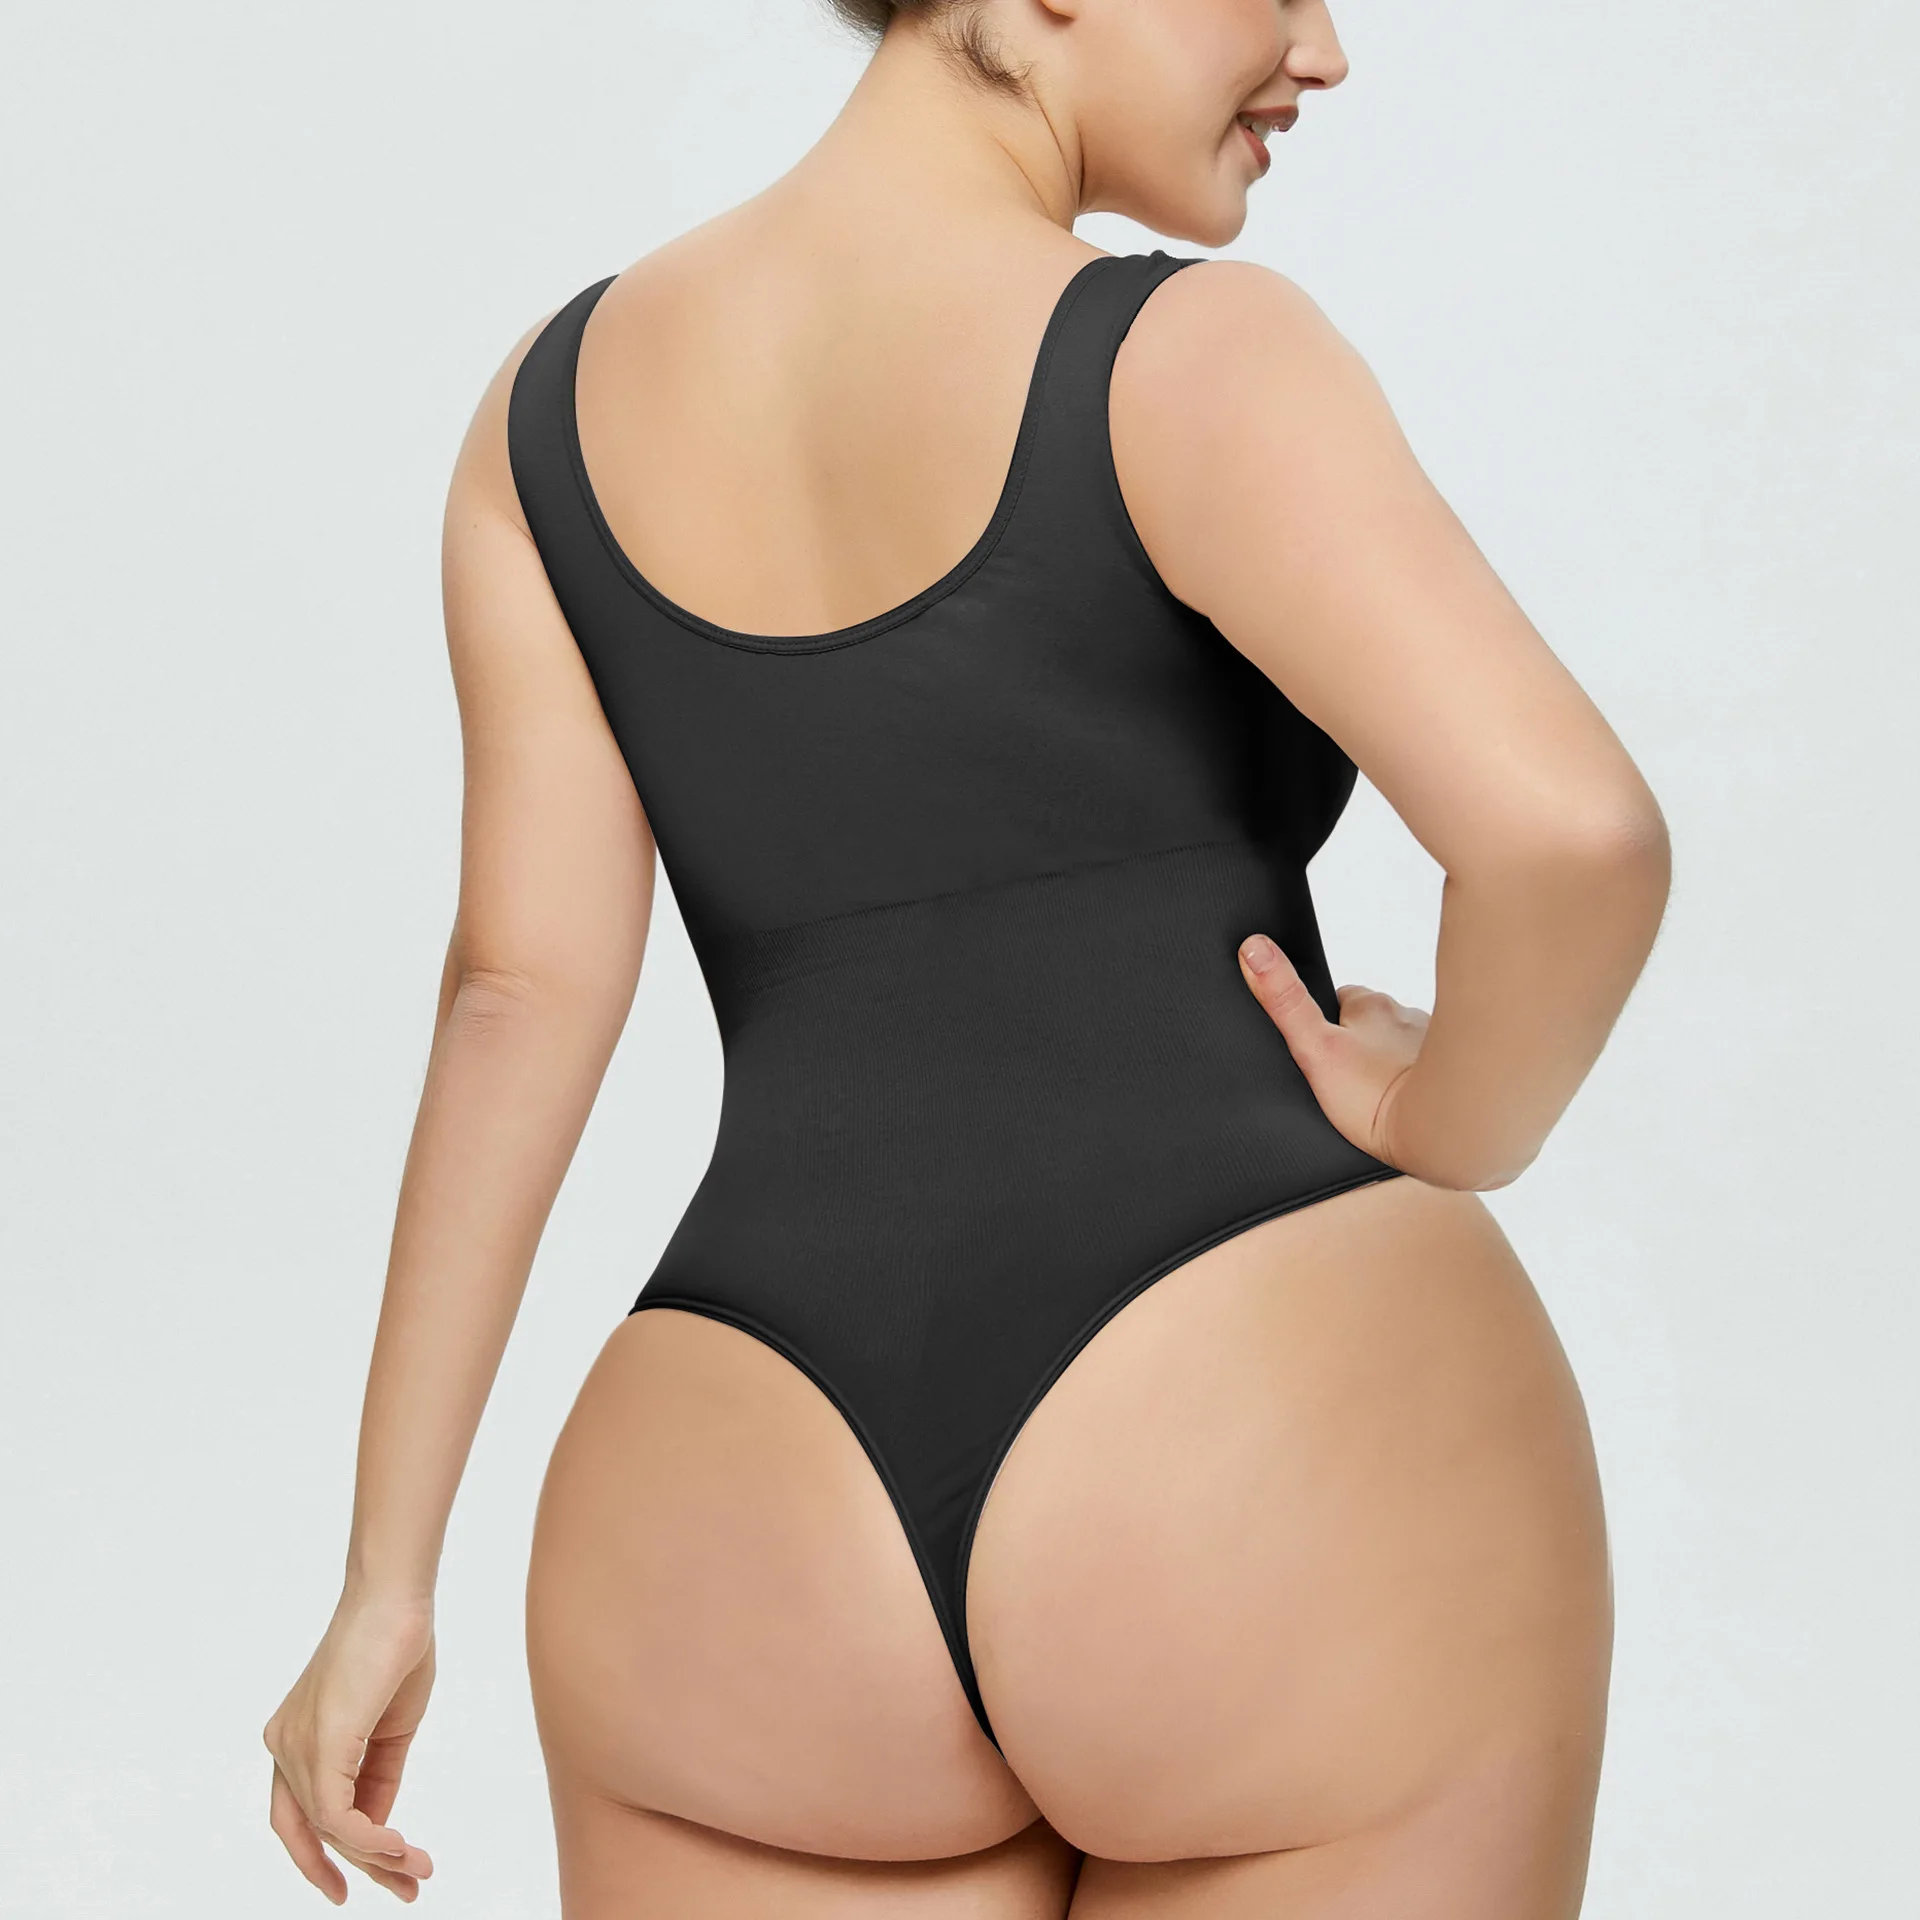 GUUDIA V Neck Spaghetti Strap Bodysuit With Open Crotch And Seamless Body  Shaper Thong Slimming Body Shaping And Compression Shapewear For Smooth Out  Look 230314 From Zhengrui03, $10.3